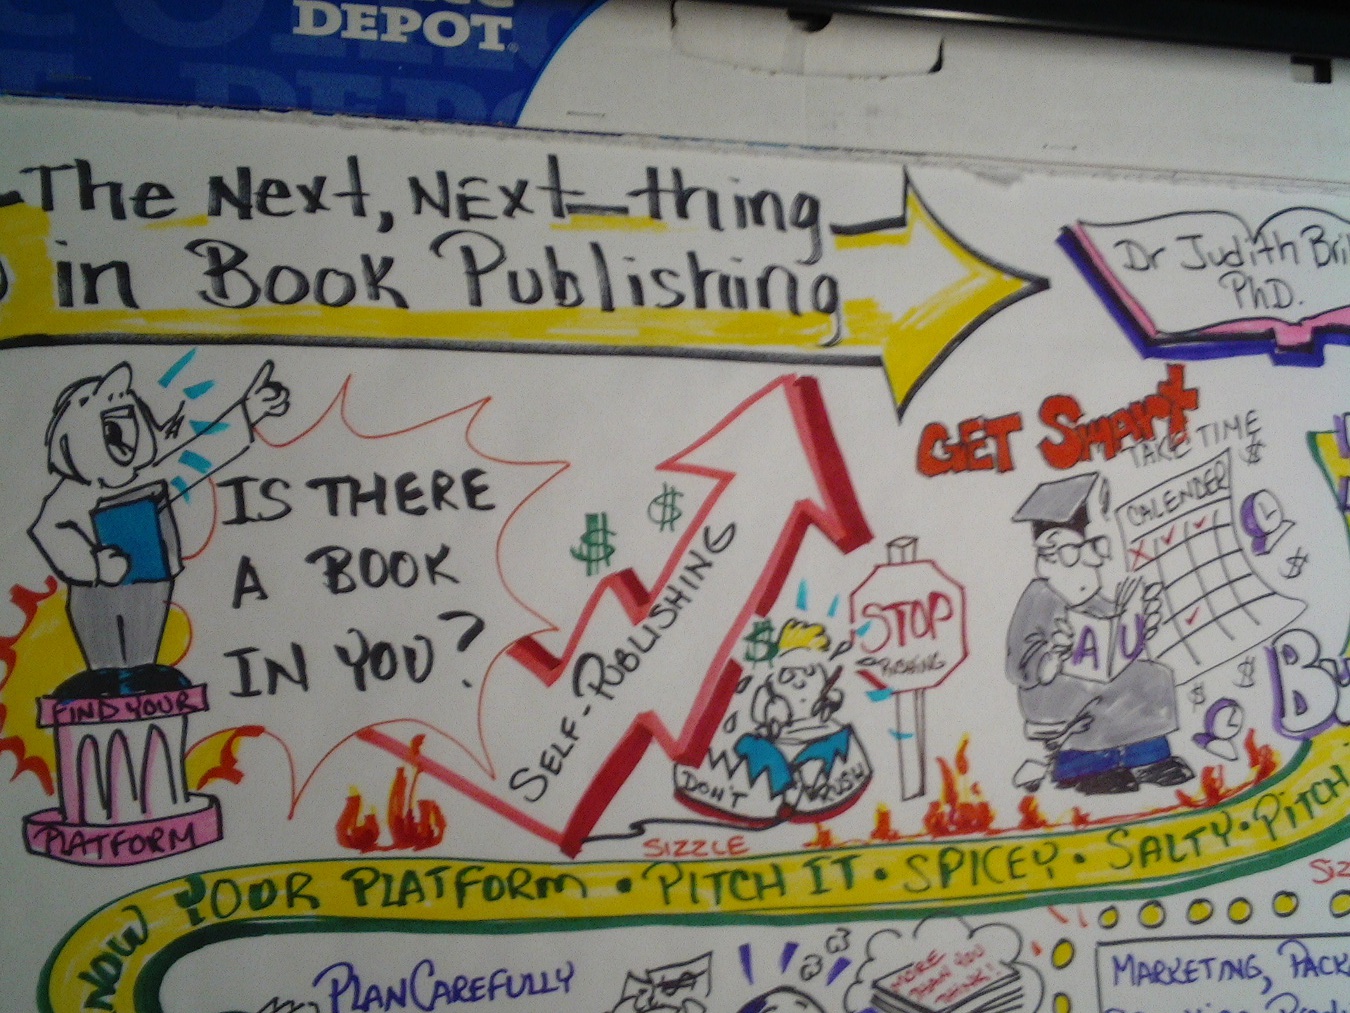 Graphic recording was on was on publishing a book by Dr. Judith Briles